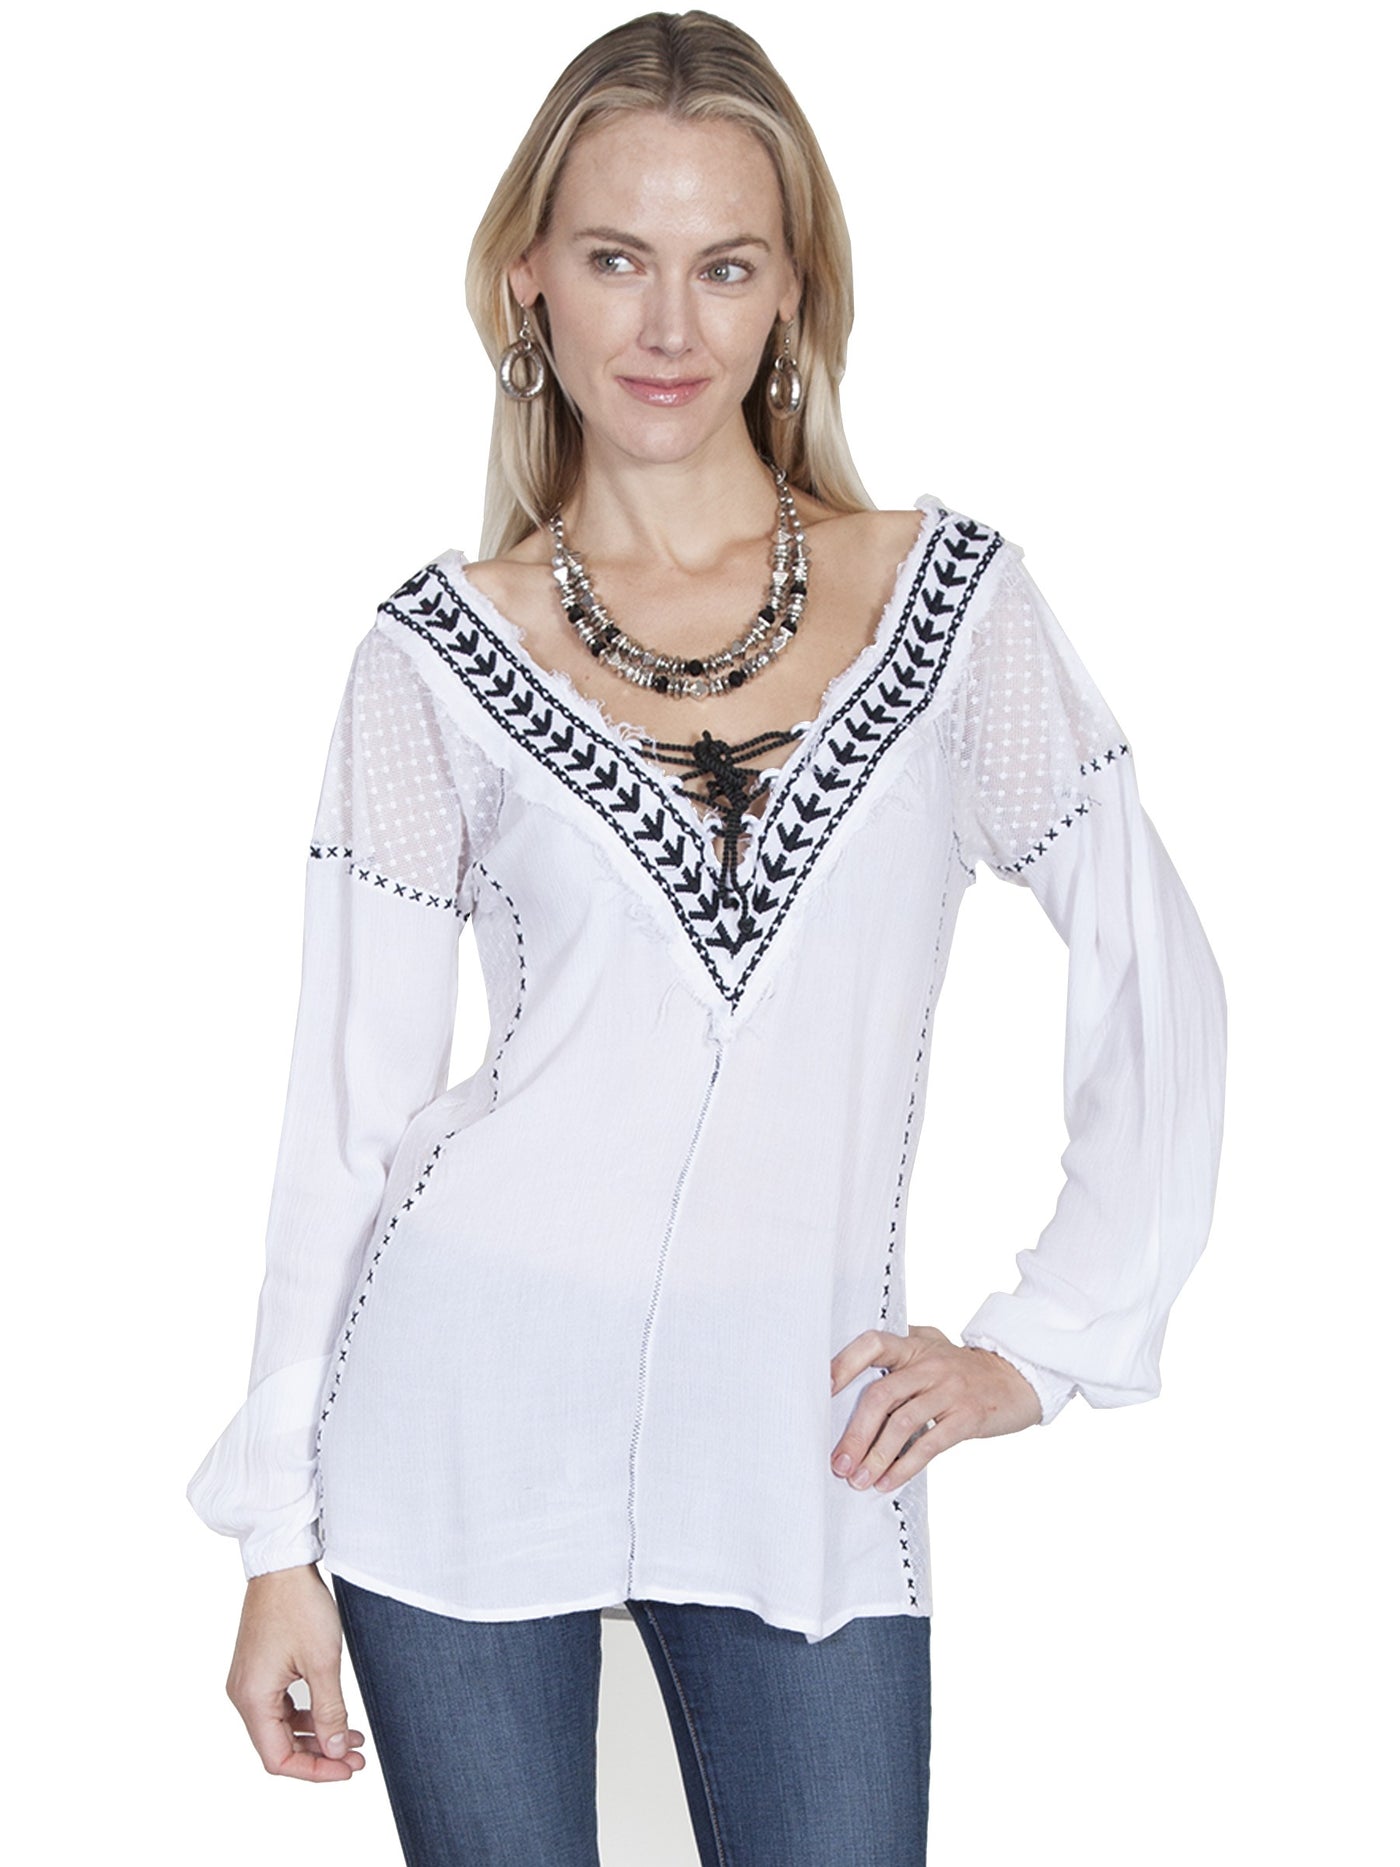 West Canyon Embroidered Blouse in White - SOLD OUT